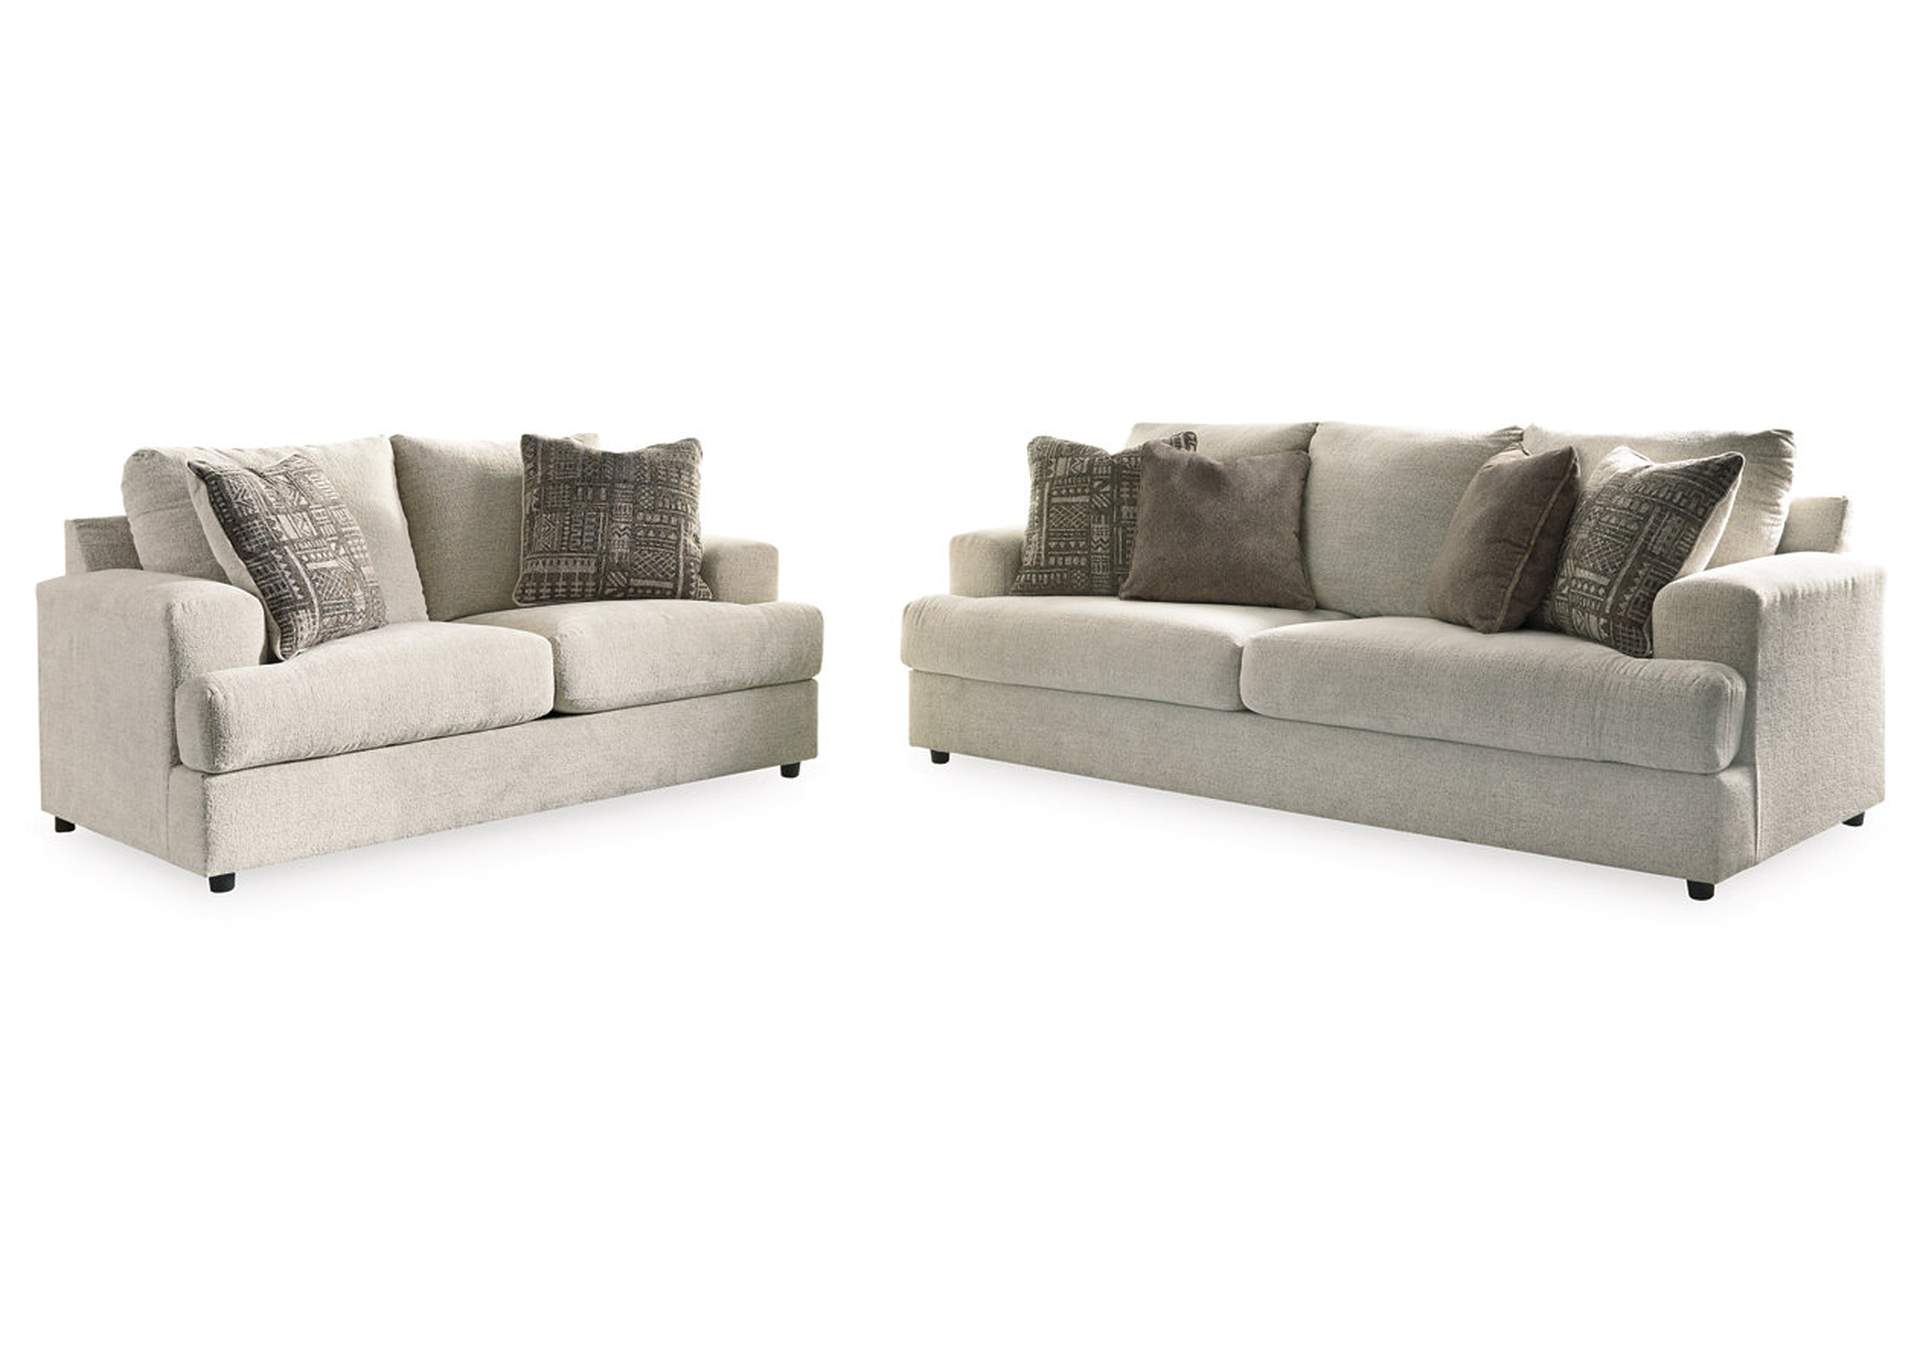 Soletren Sofa and Loveseat,Signature Design By Ashley